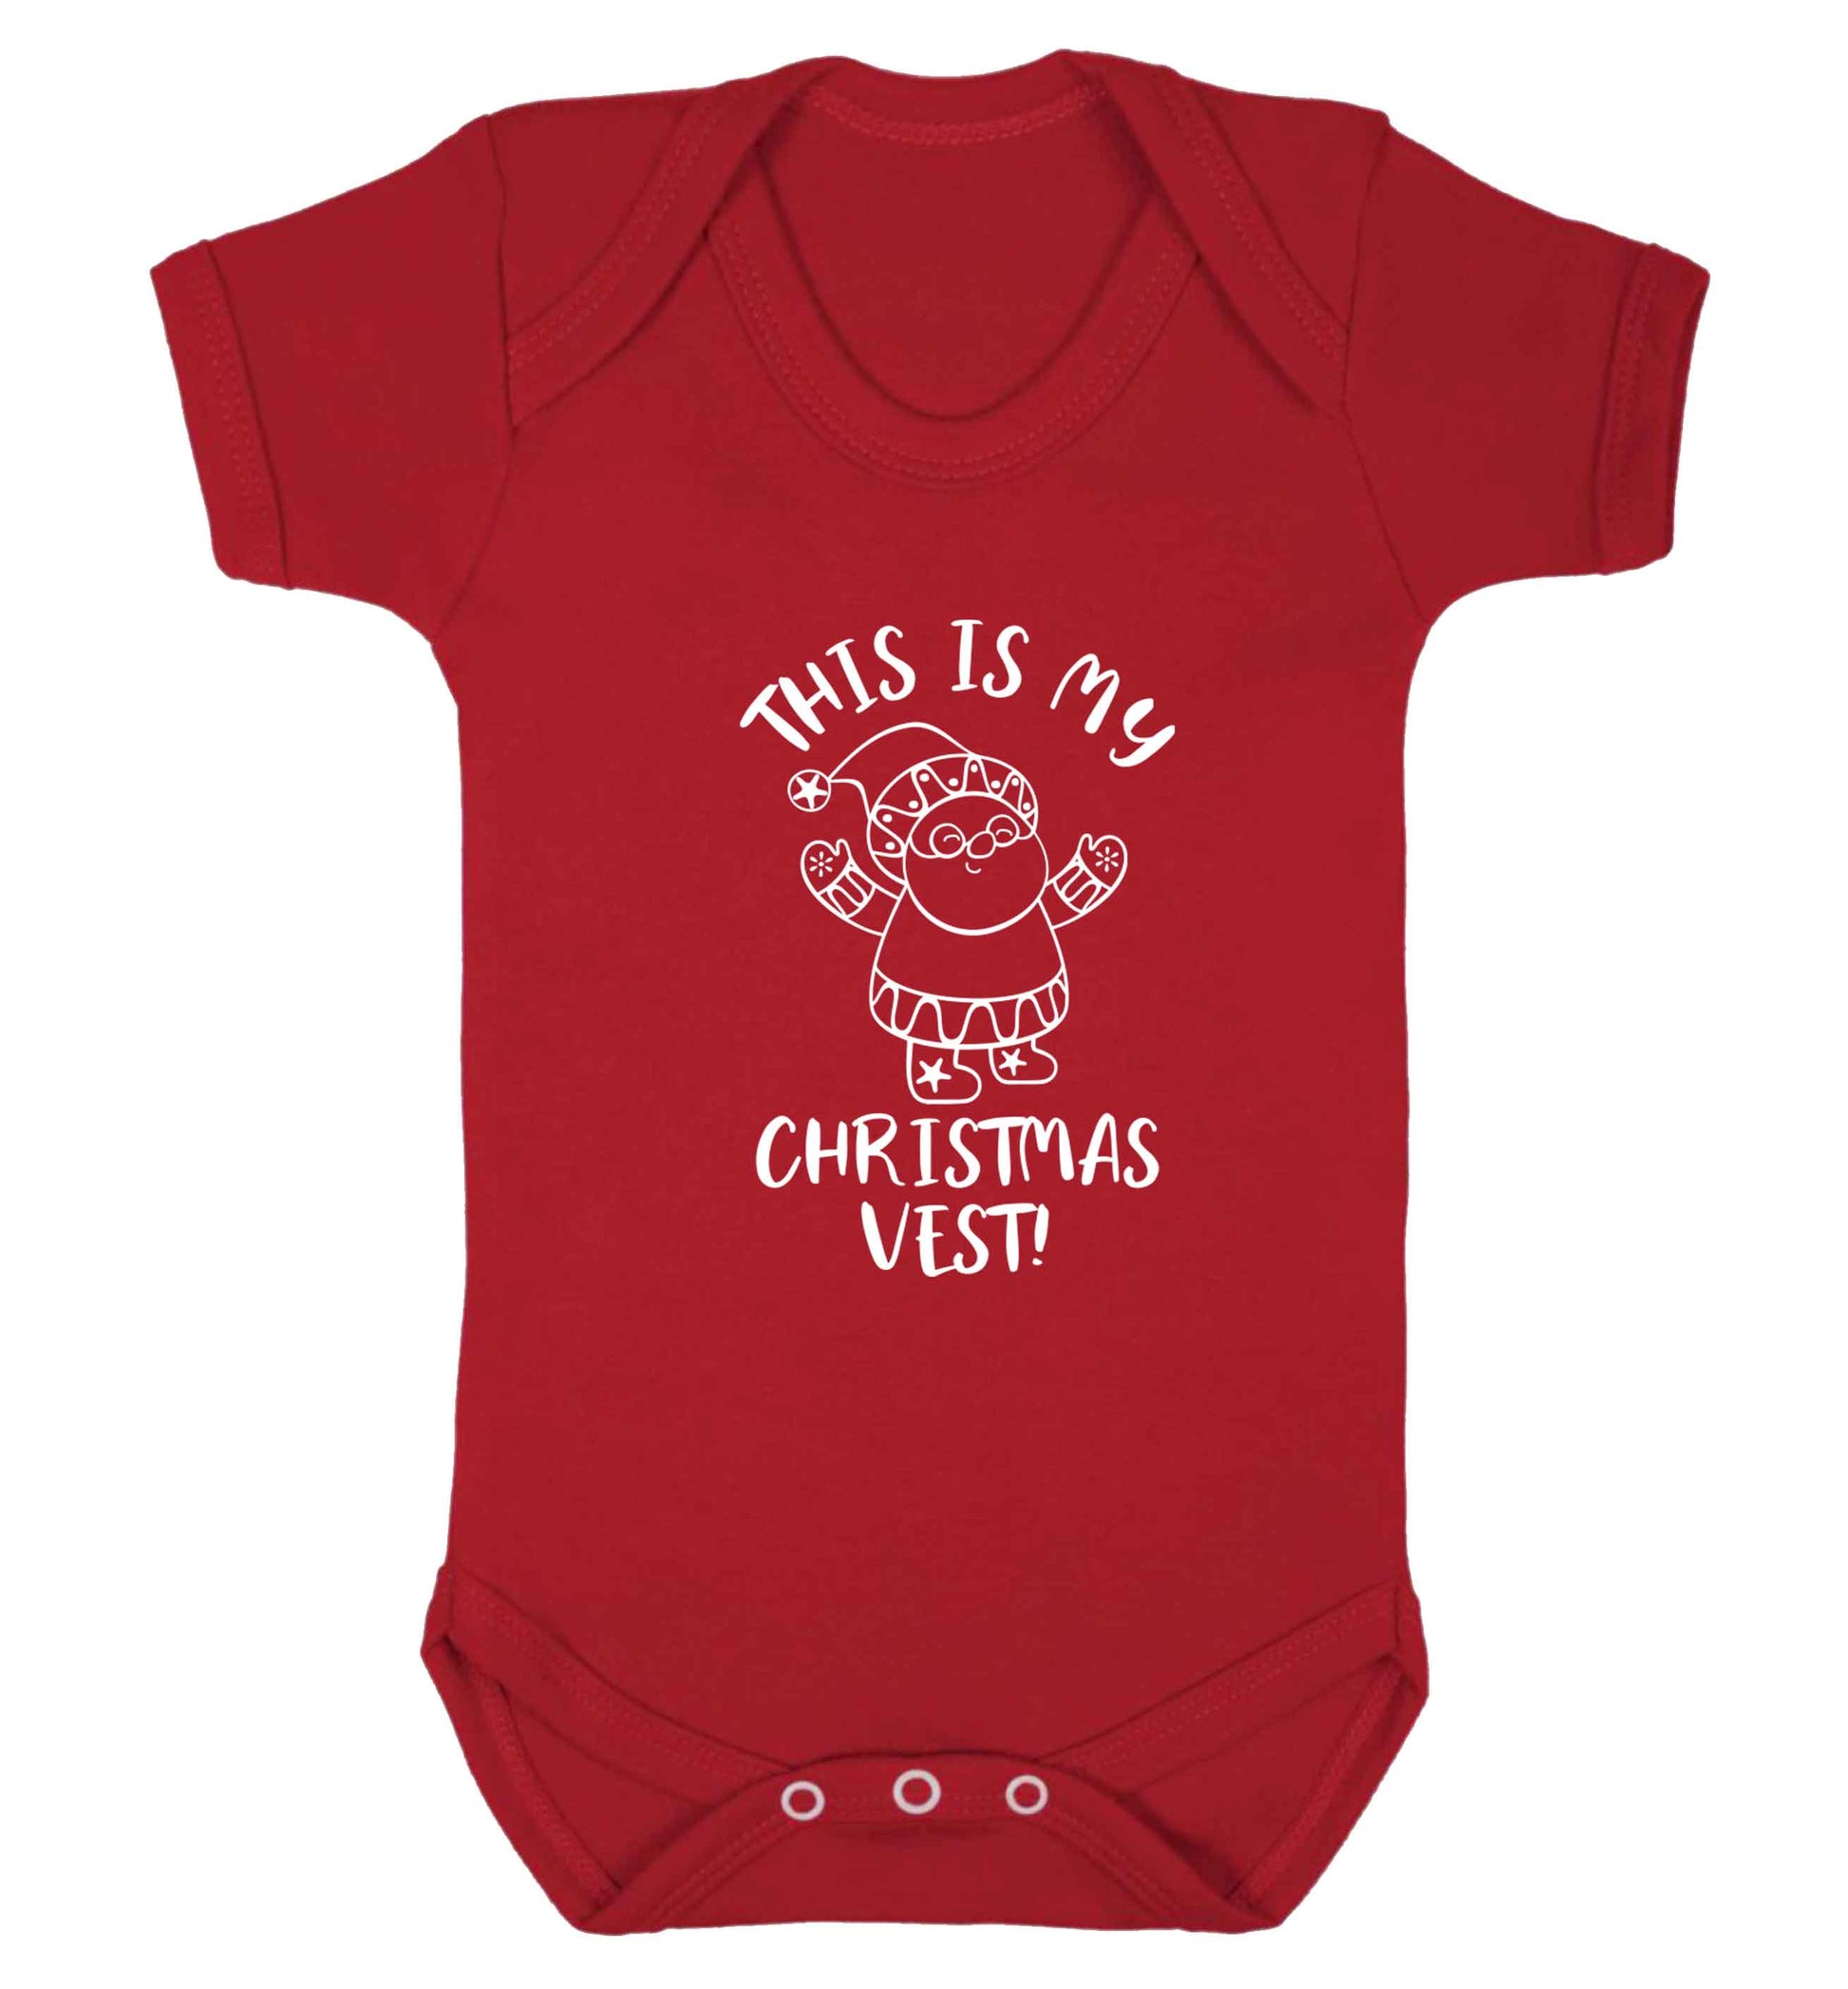 This is my Christmas vest Baby Vest red 18-24 months